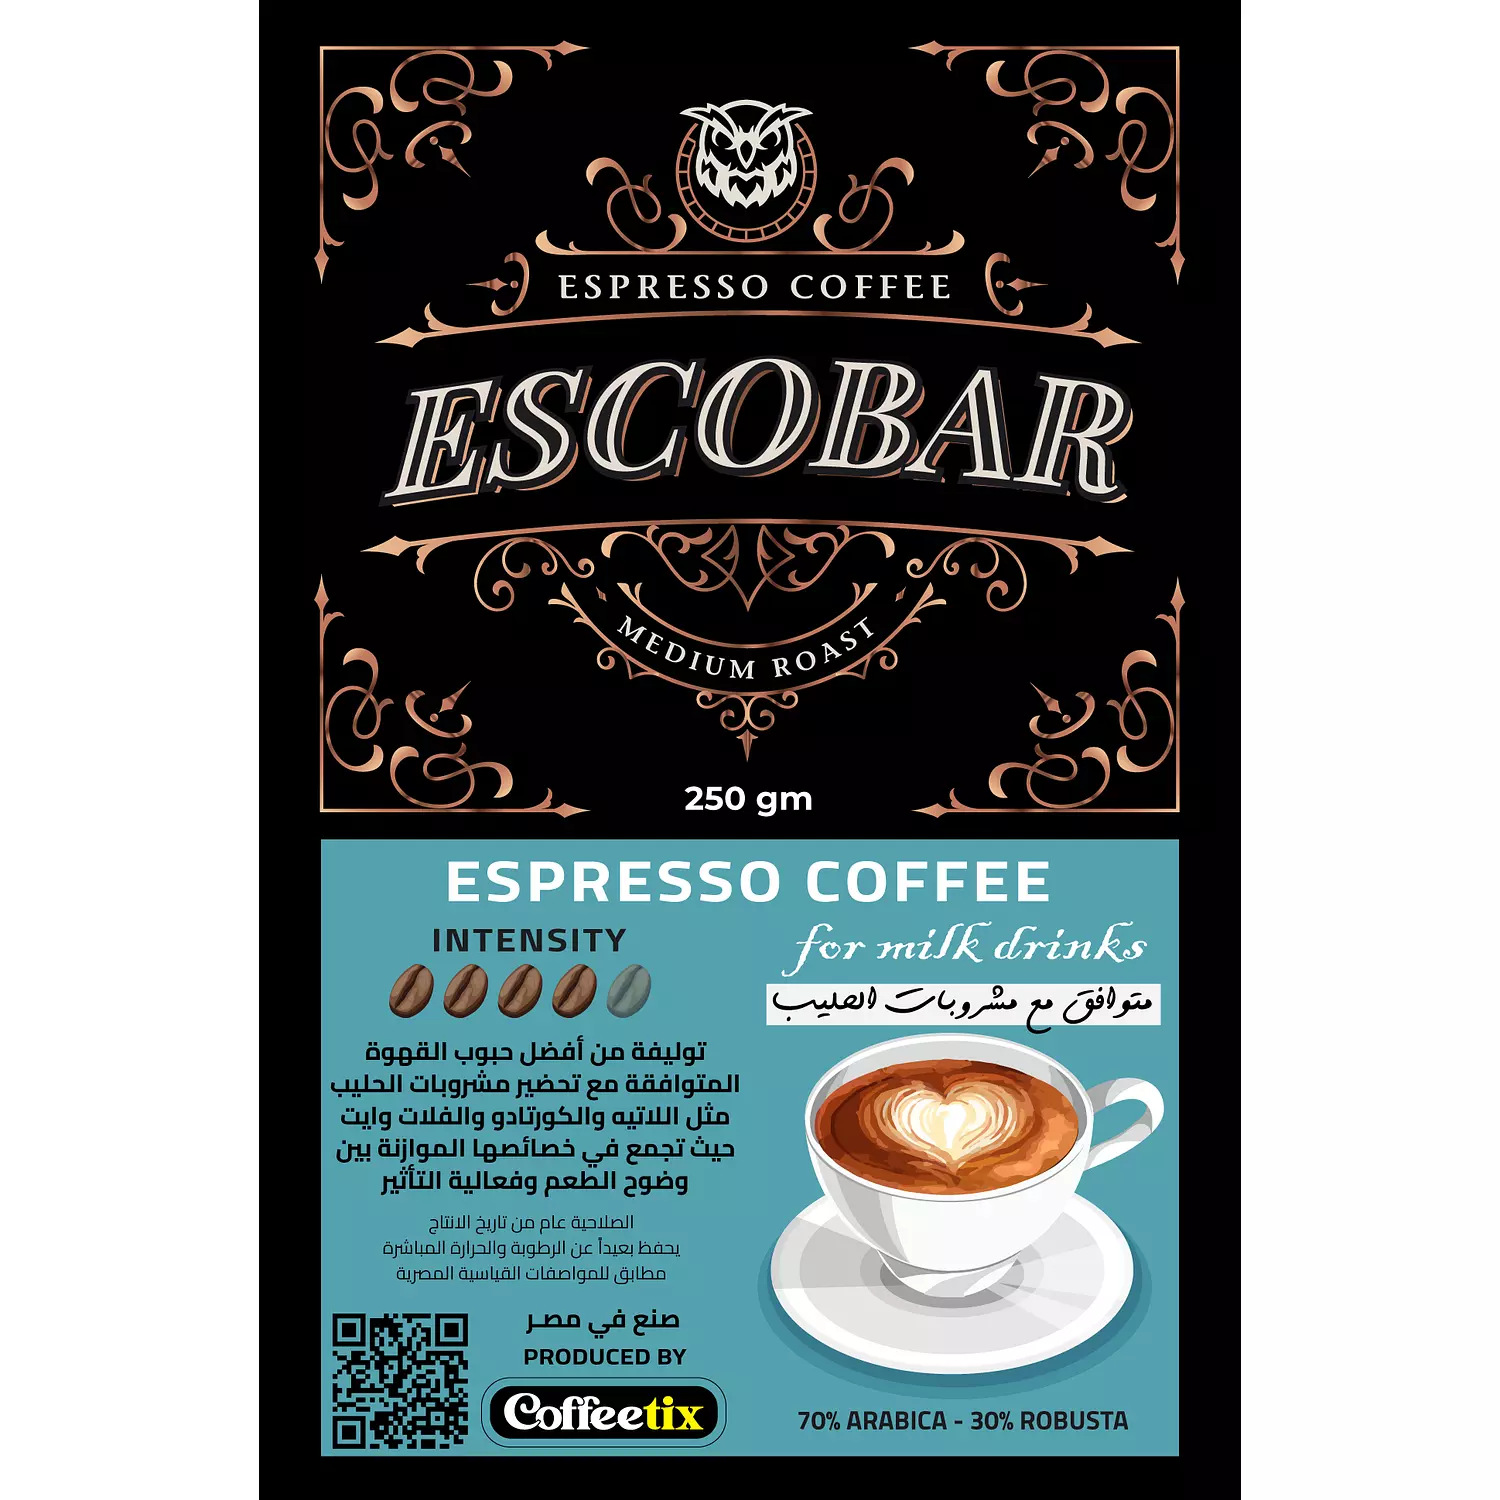 Espresso coffee compatible with milk drinks hover image